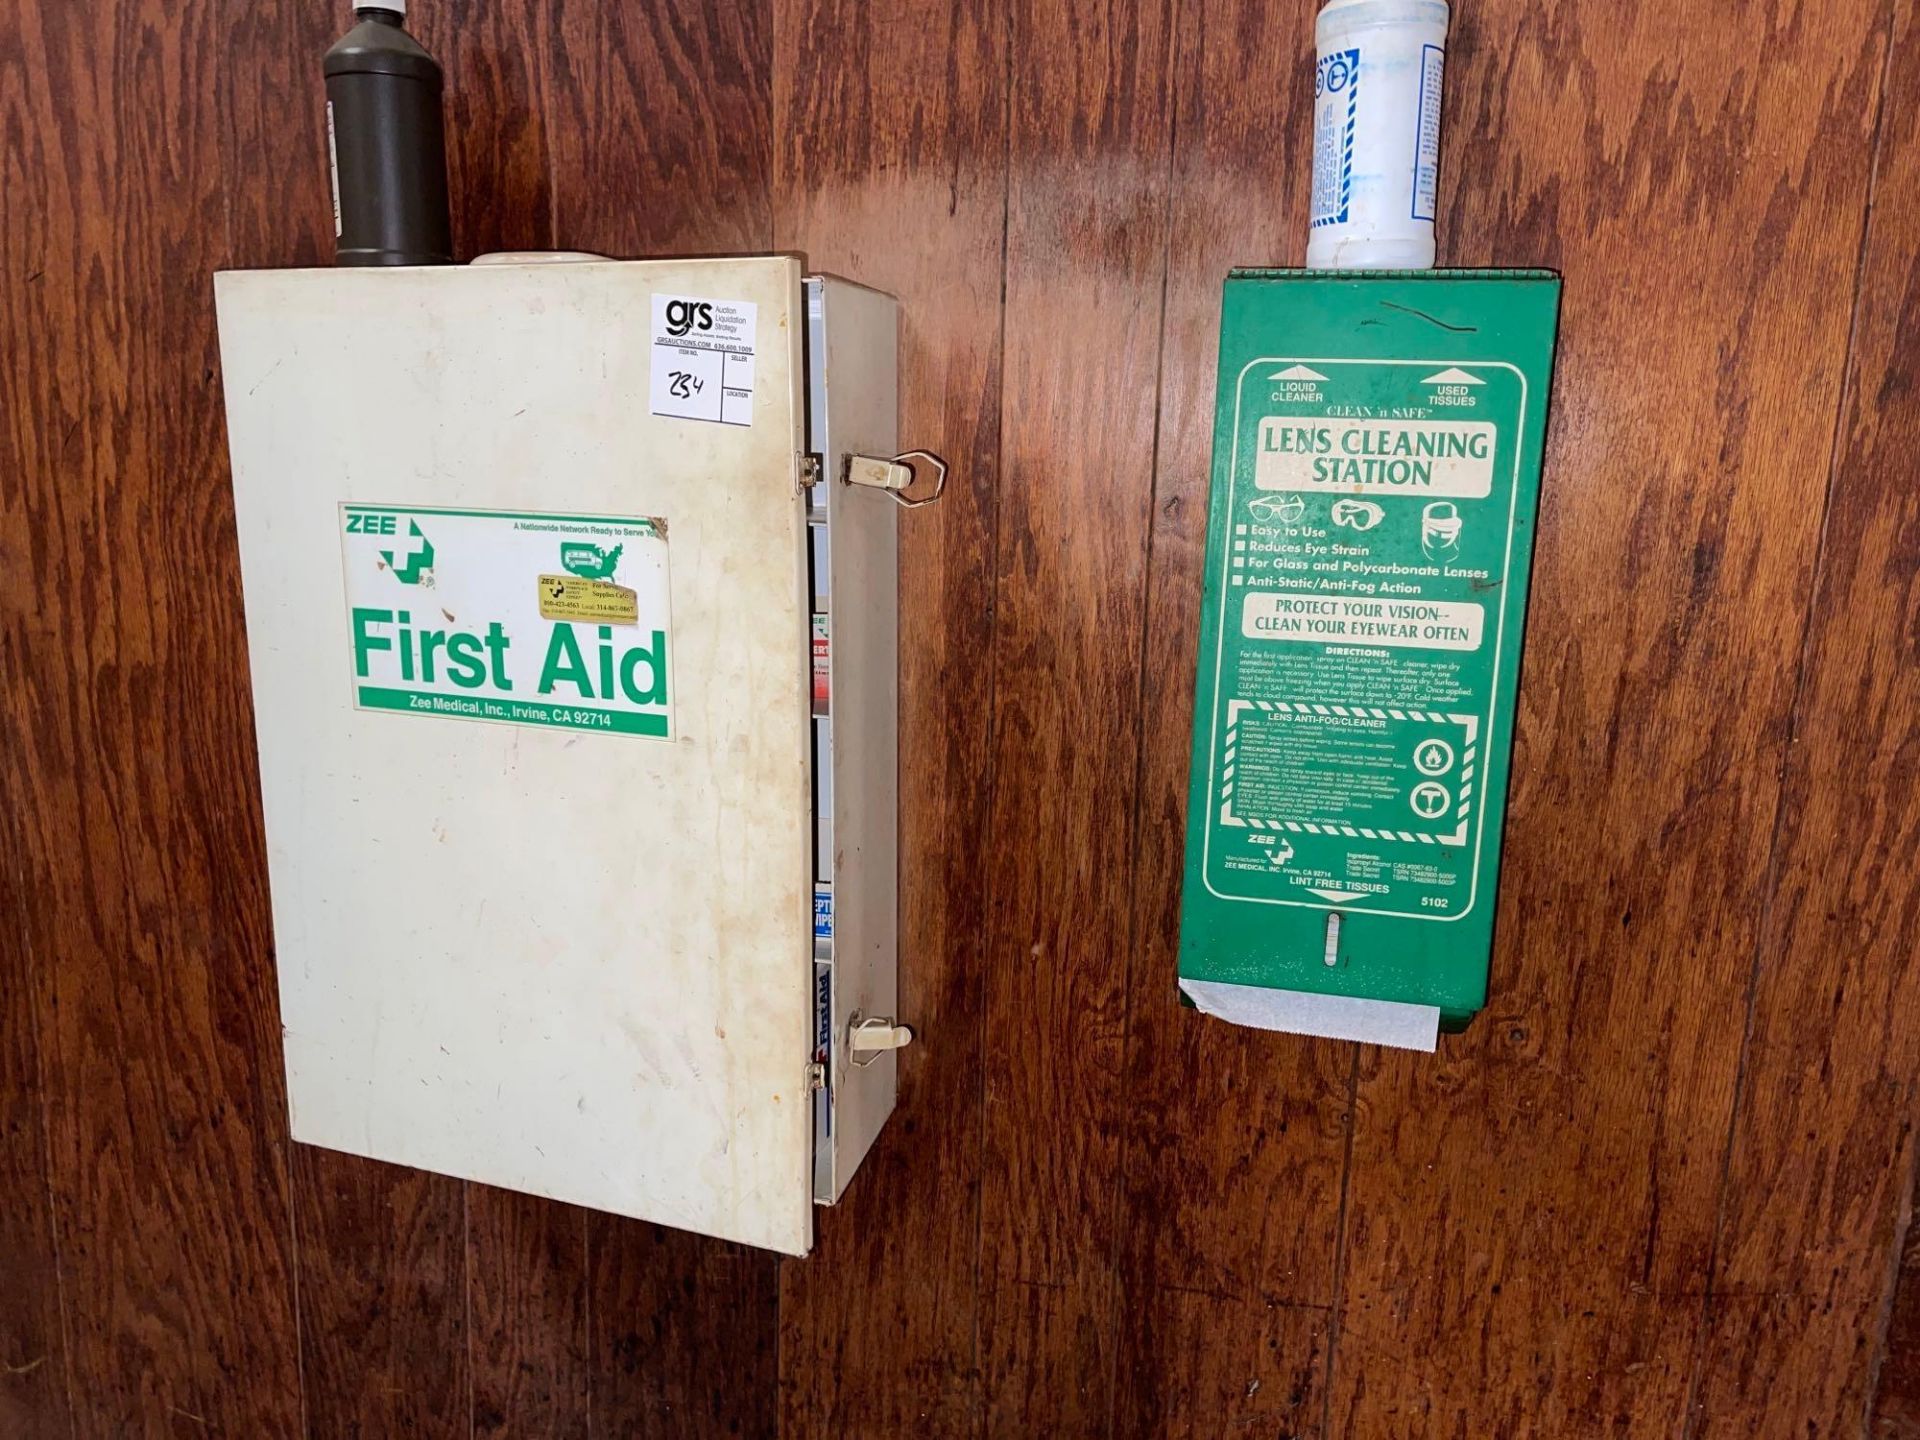 First Aid and Lens Cleaning Stations